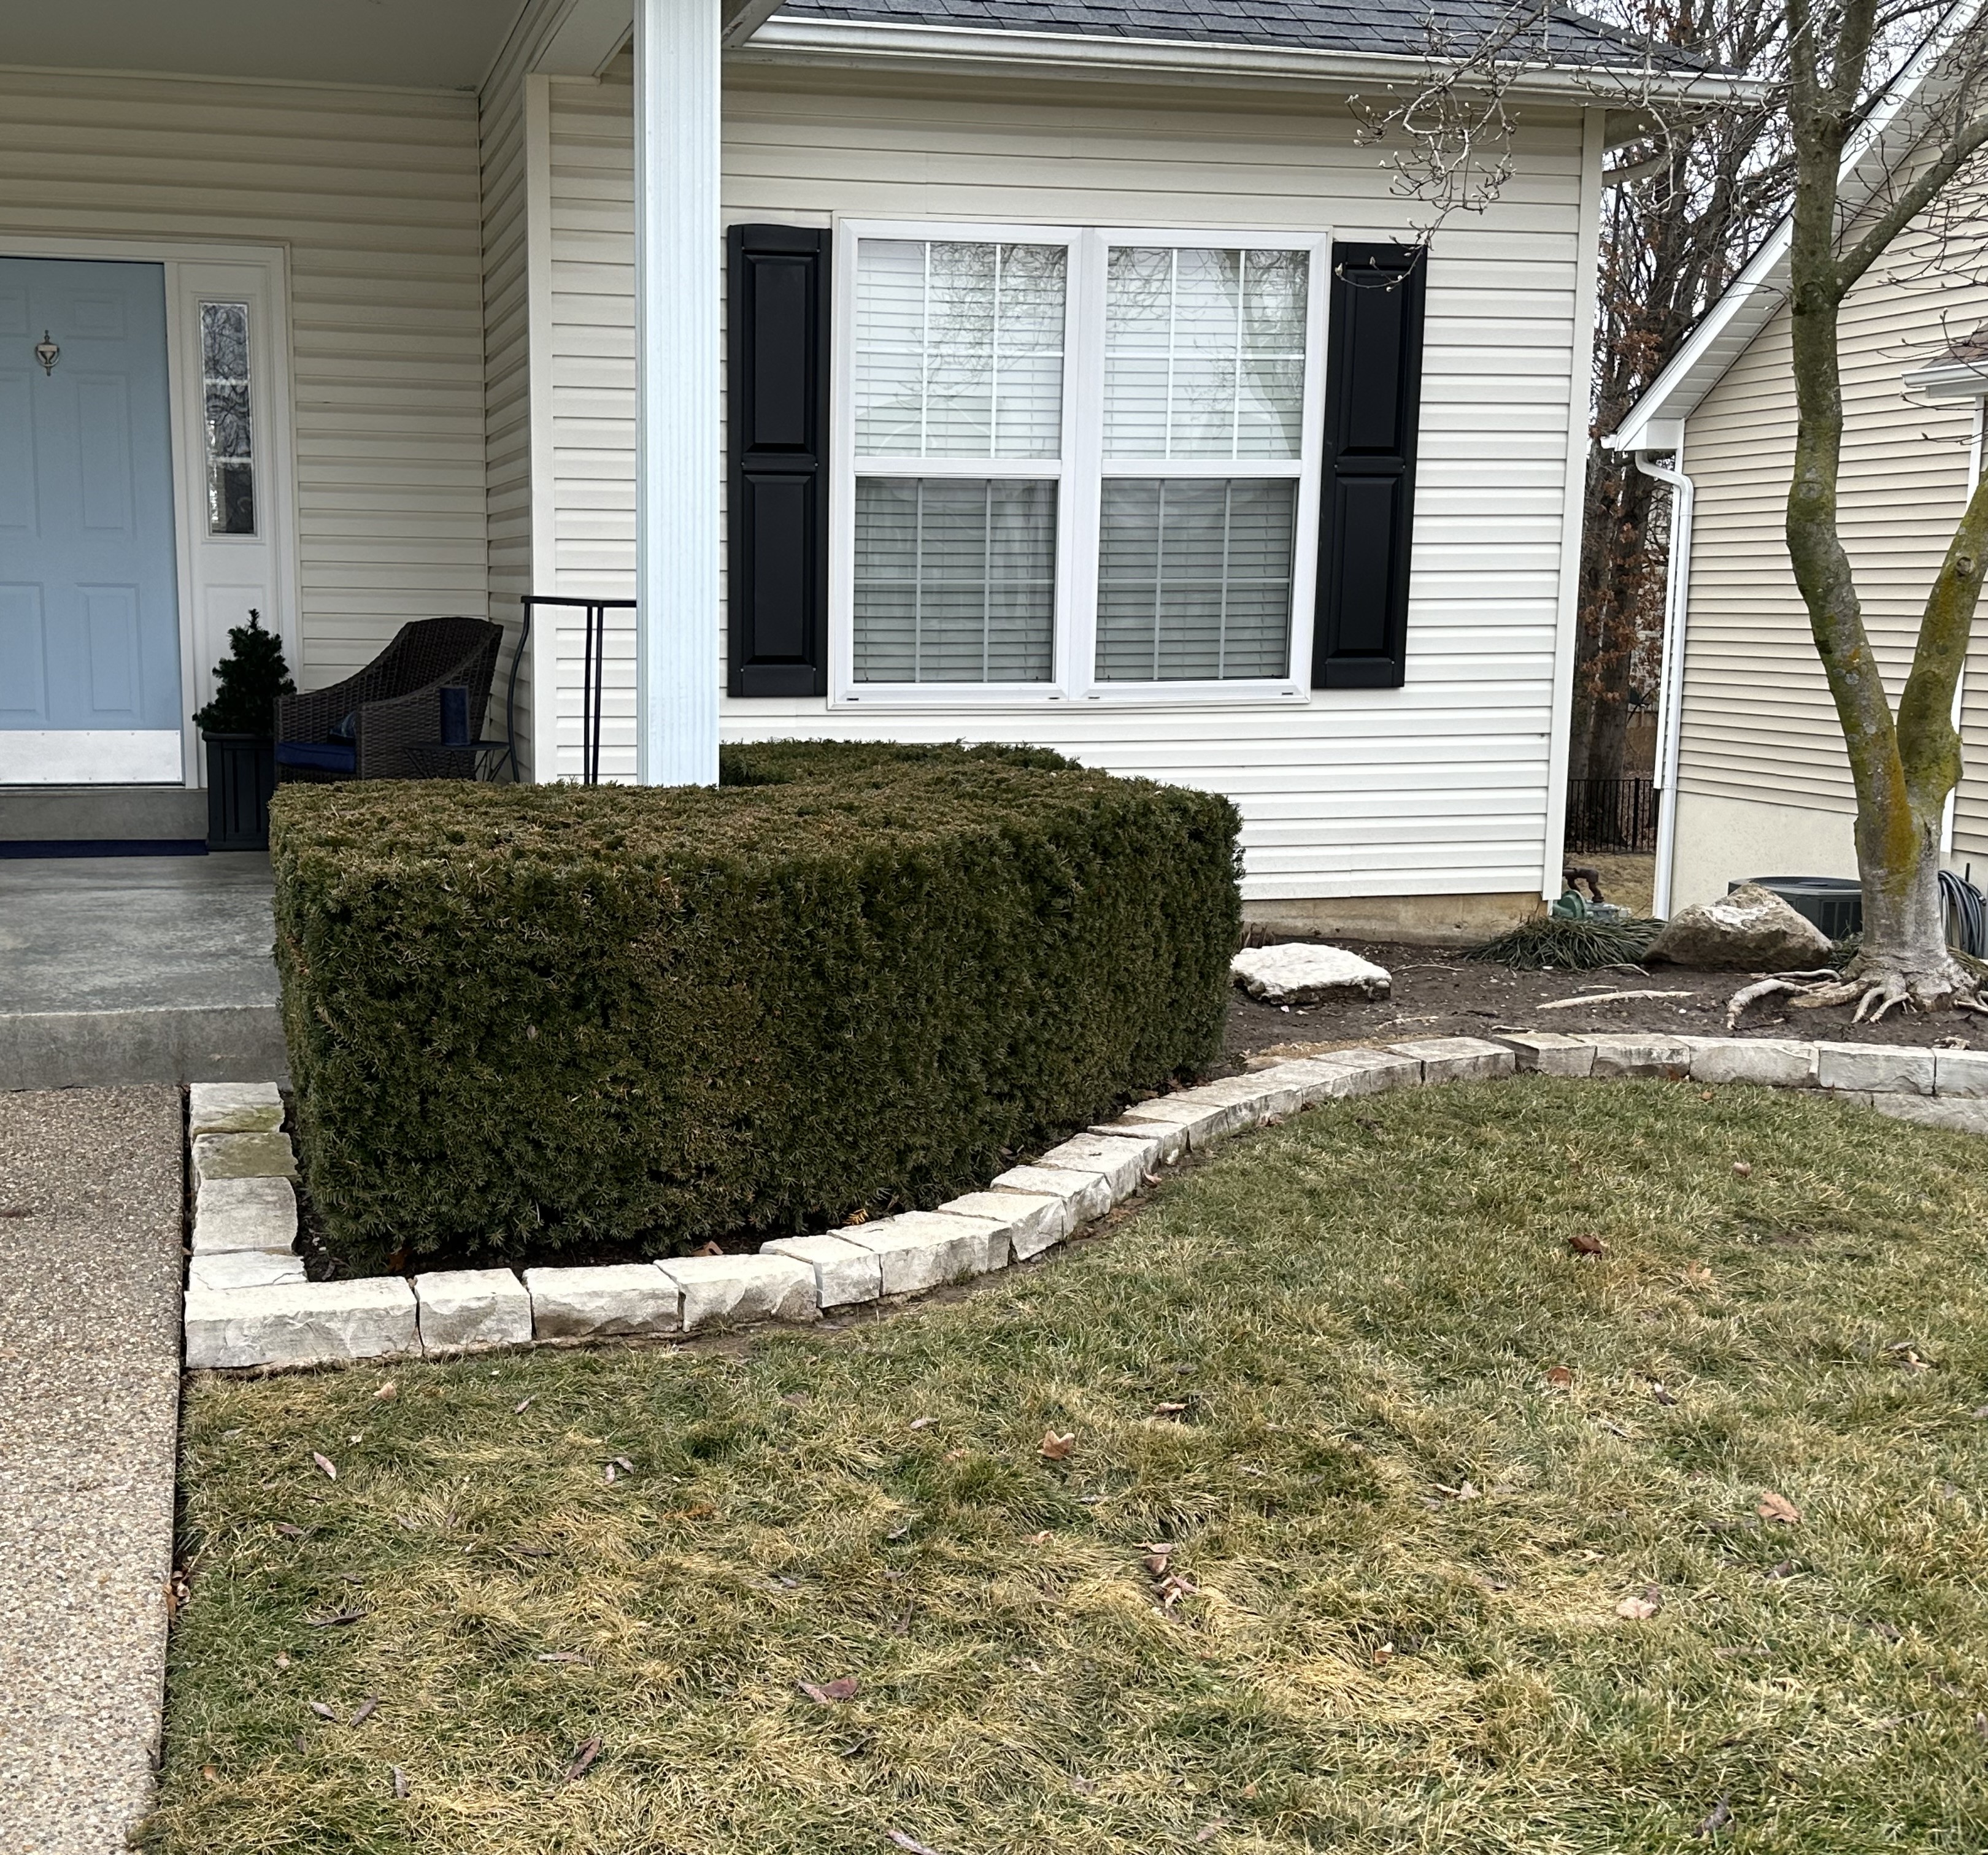 Top Quality, Level and Even Bush Trimming Service Performed in O'Fallon, MO